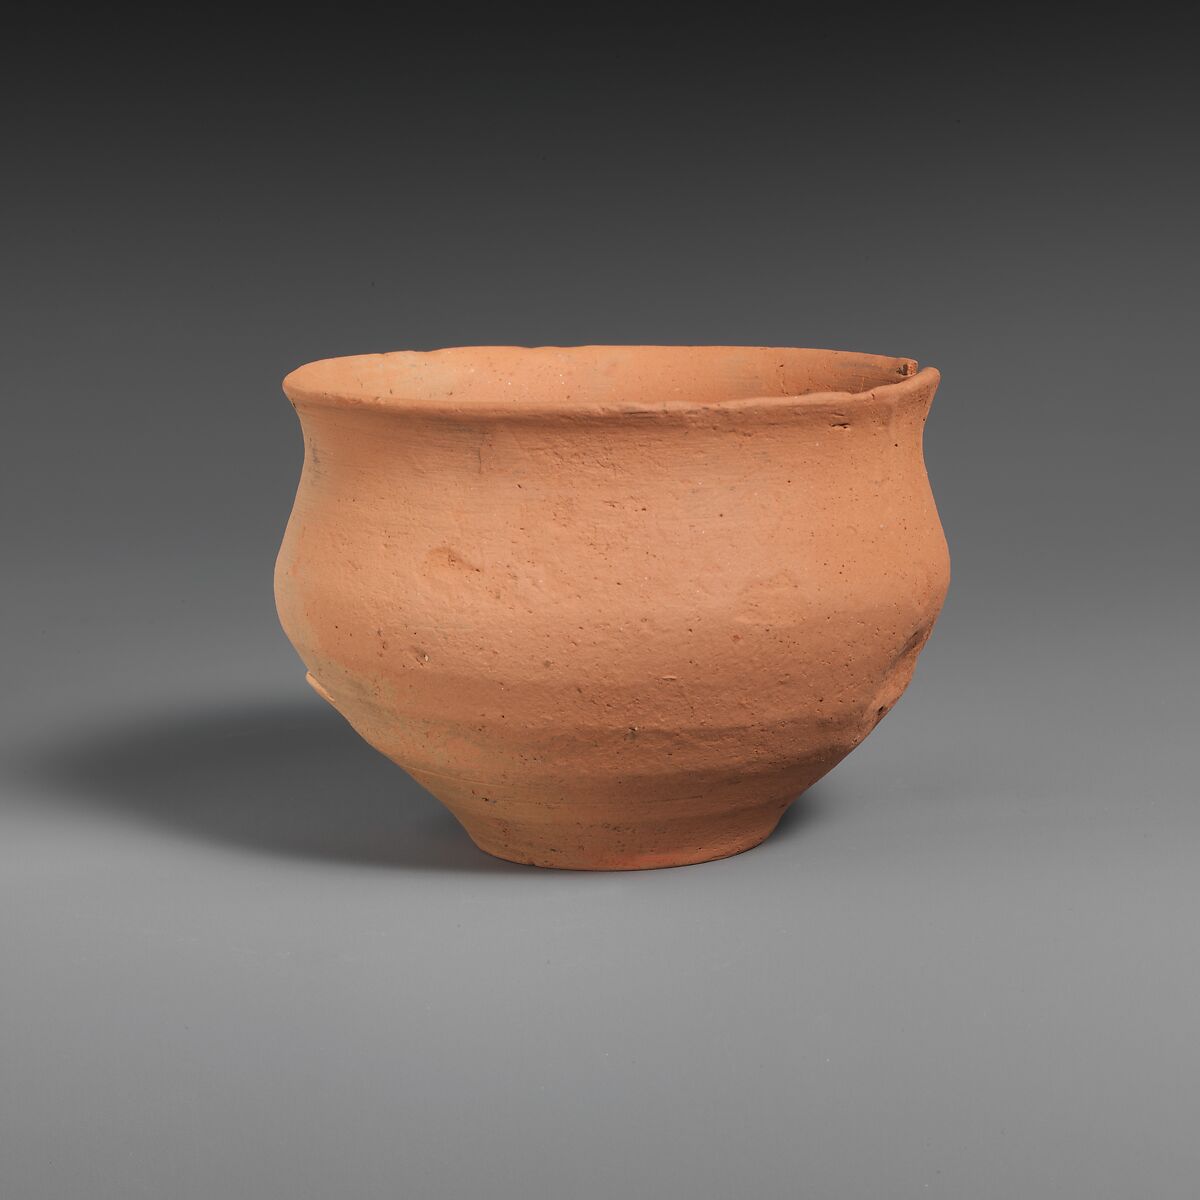 Terracotta kantharos (drinking cup with high handles), Terracotta, Greek, Attic 